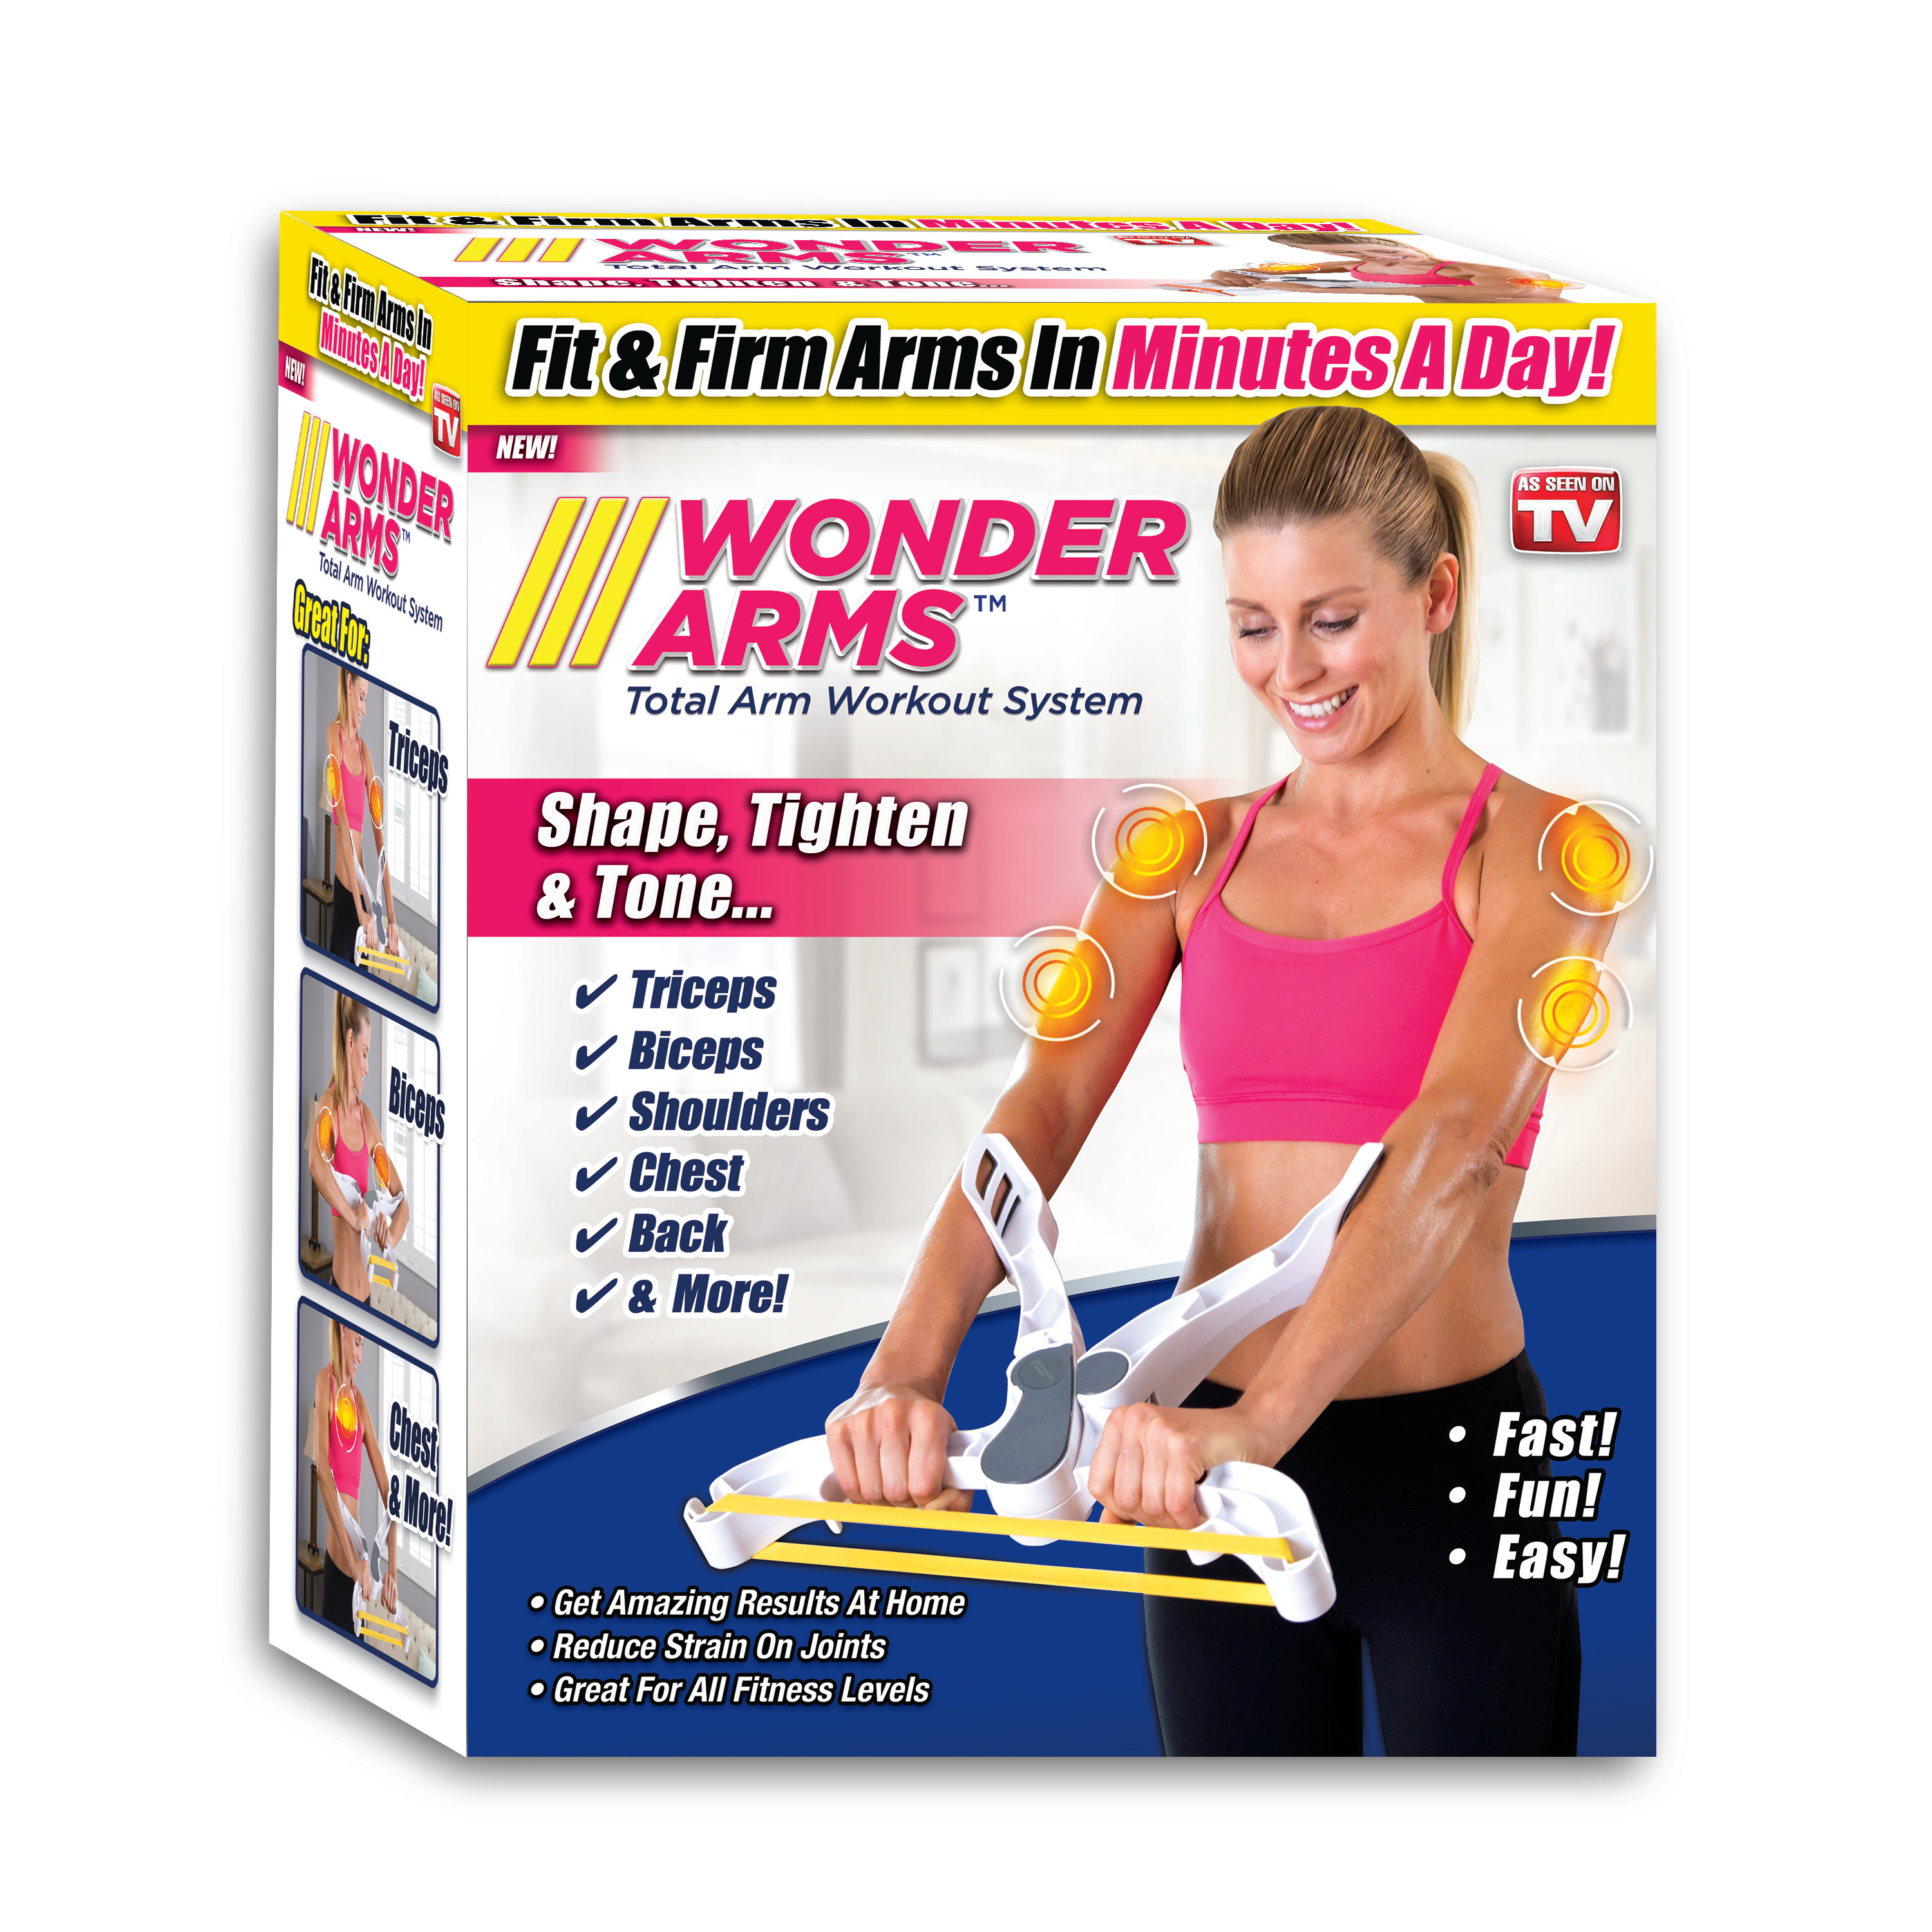 As Seen On TV Wonder Arms Total Arm Workout System